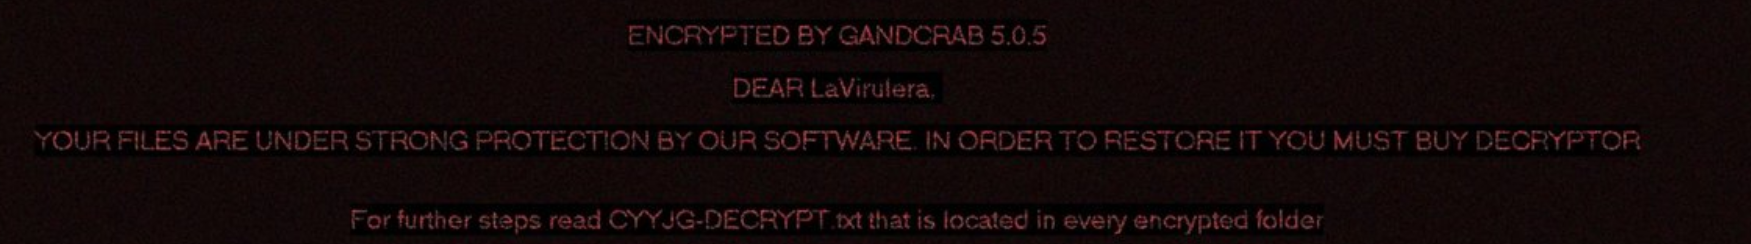 GandCrab 5.0.5 ransom image bestsecuritysearch